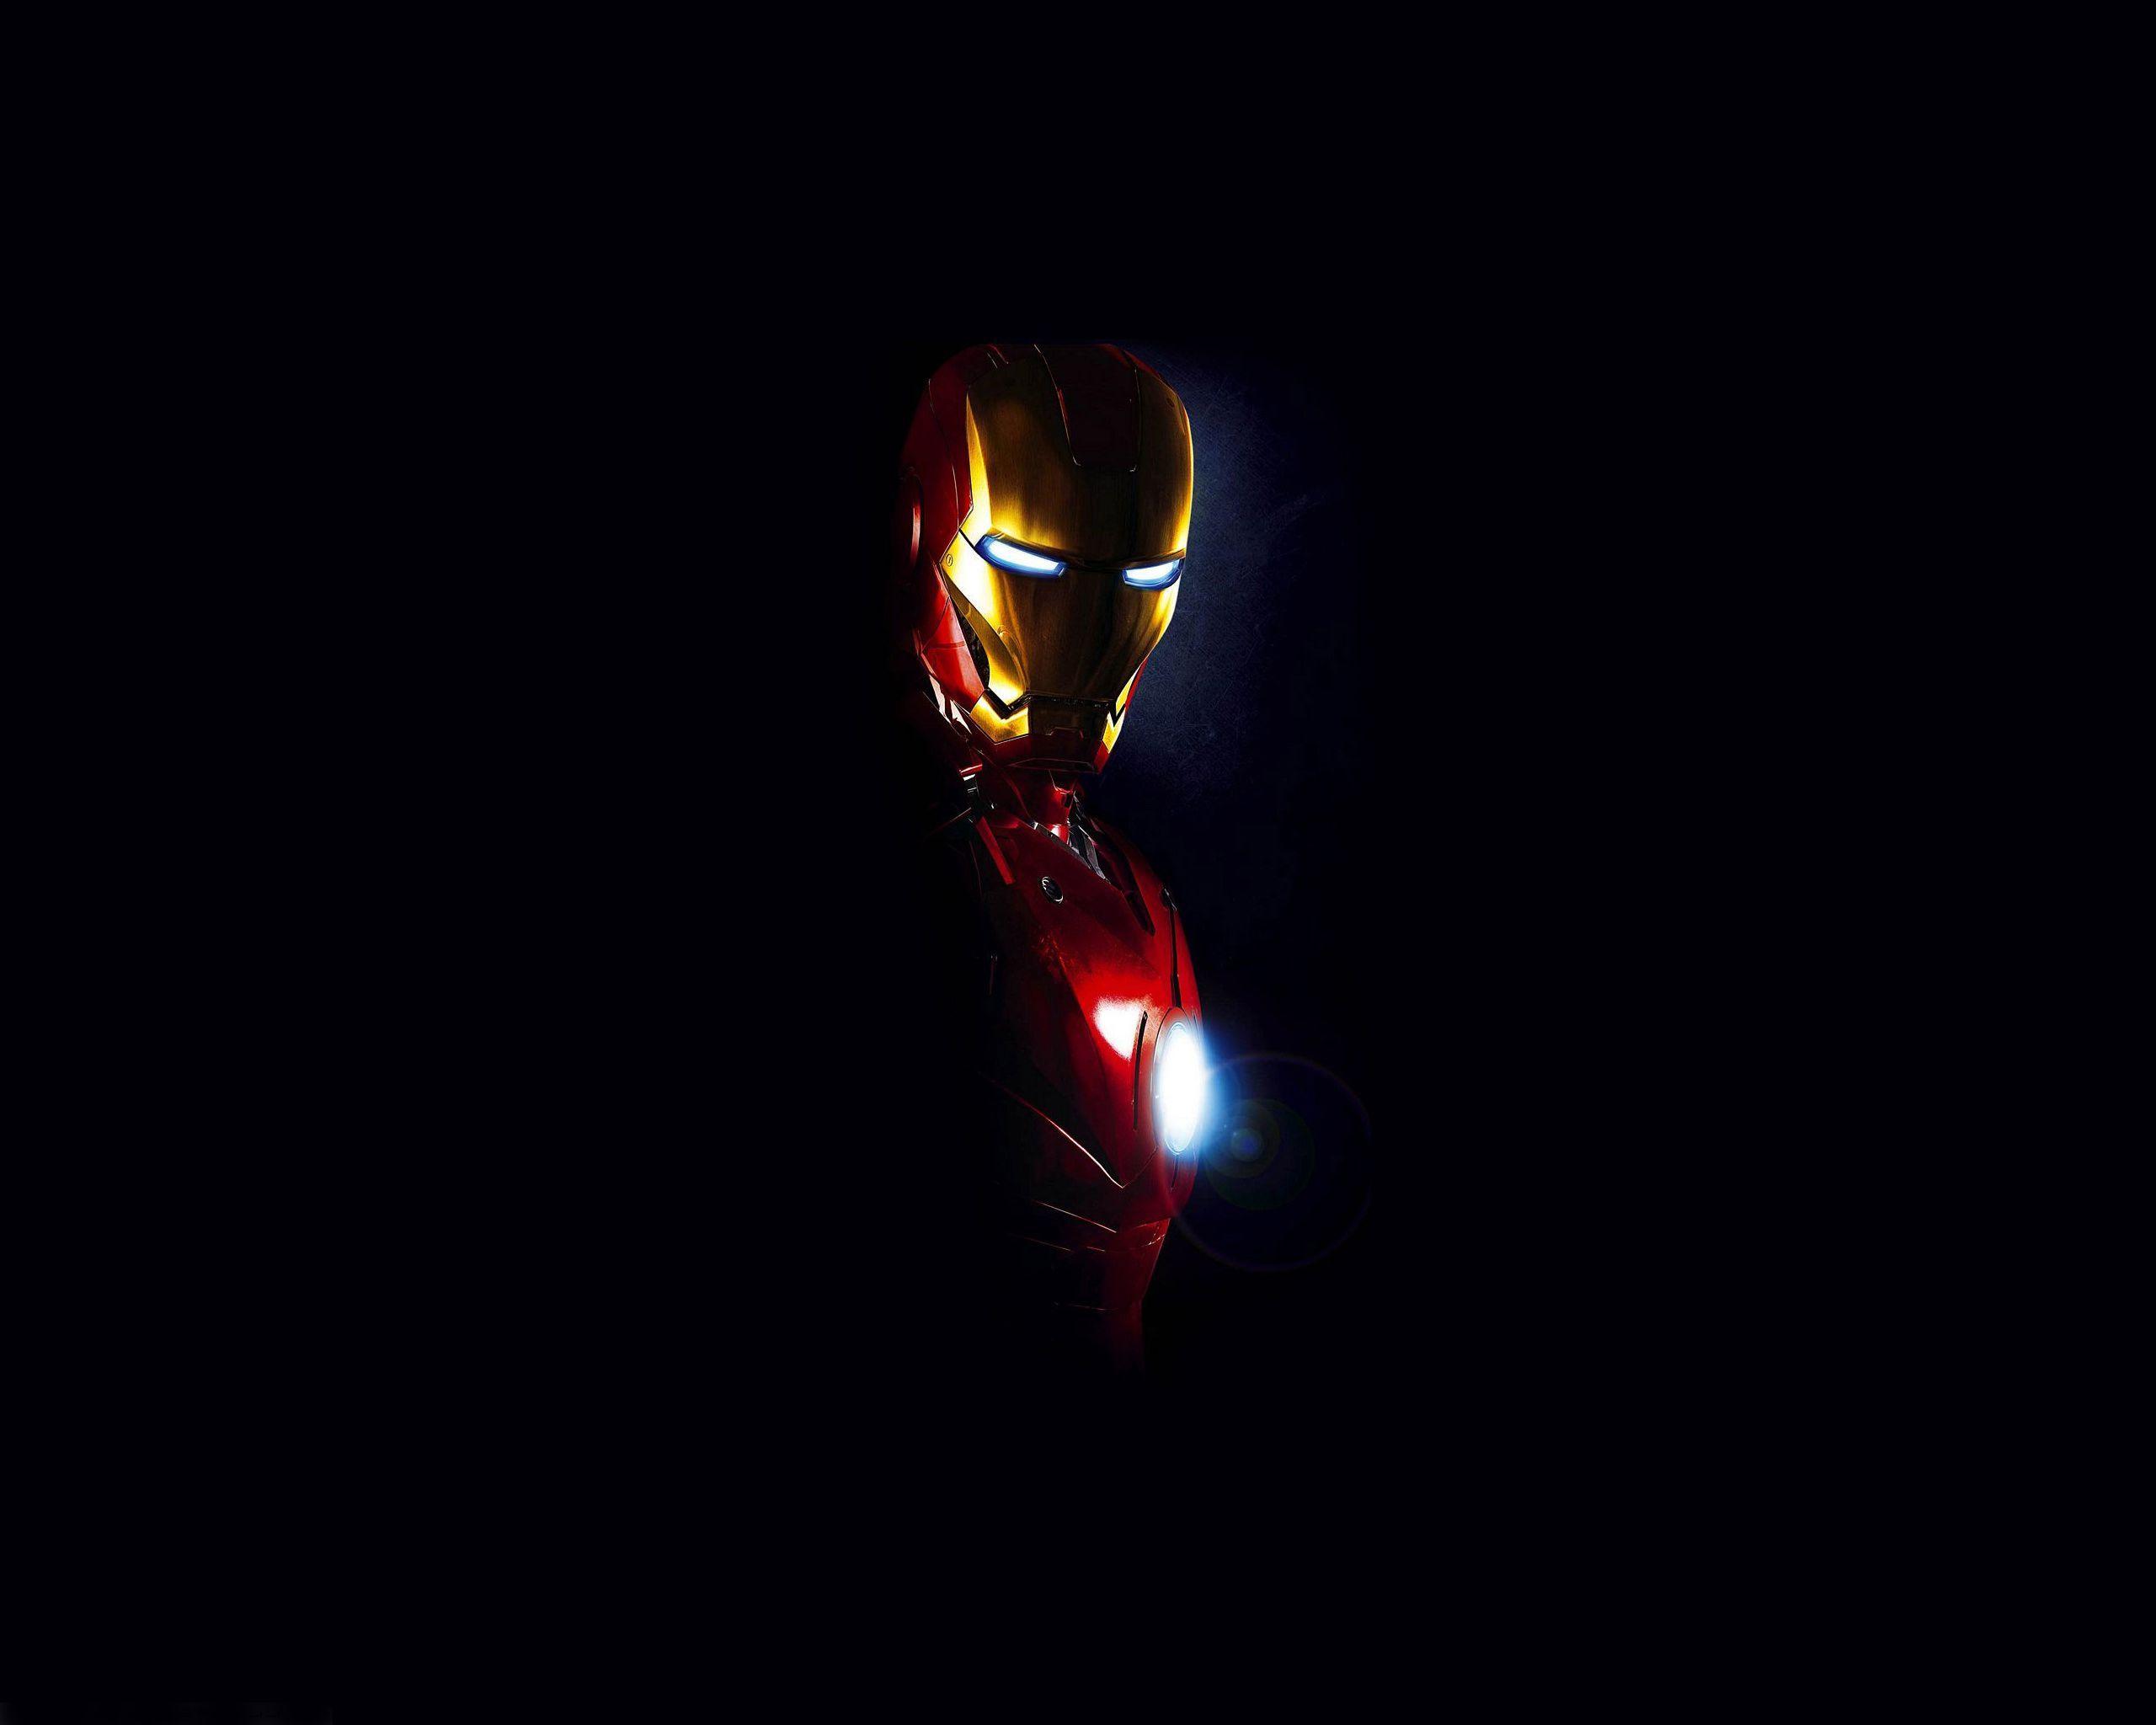 Cool Picture of Iron Man Photo with Dark Background. Iron man wallpaper, Iron man HD wallpaper, Man wallpaper